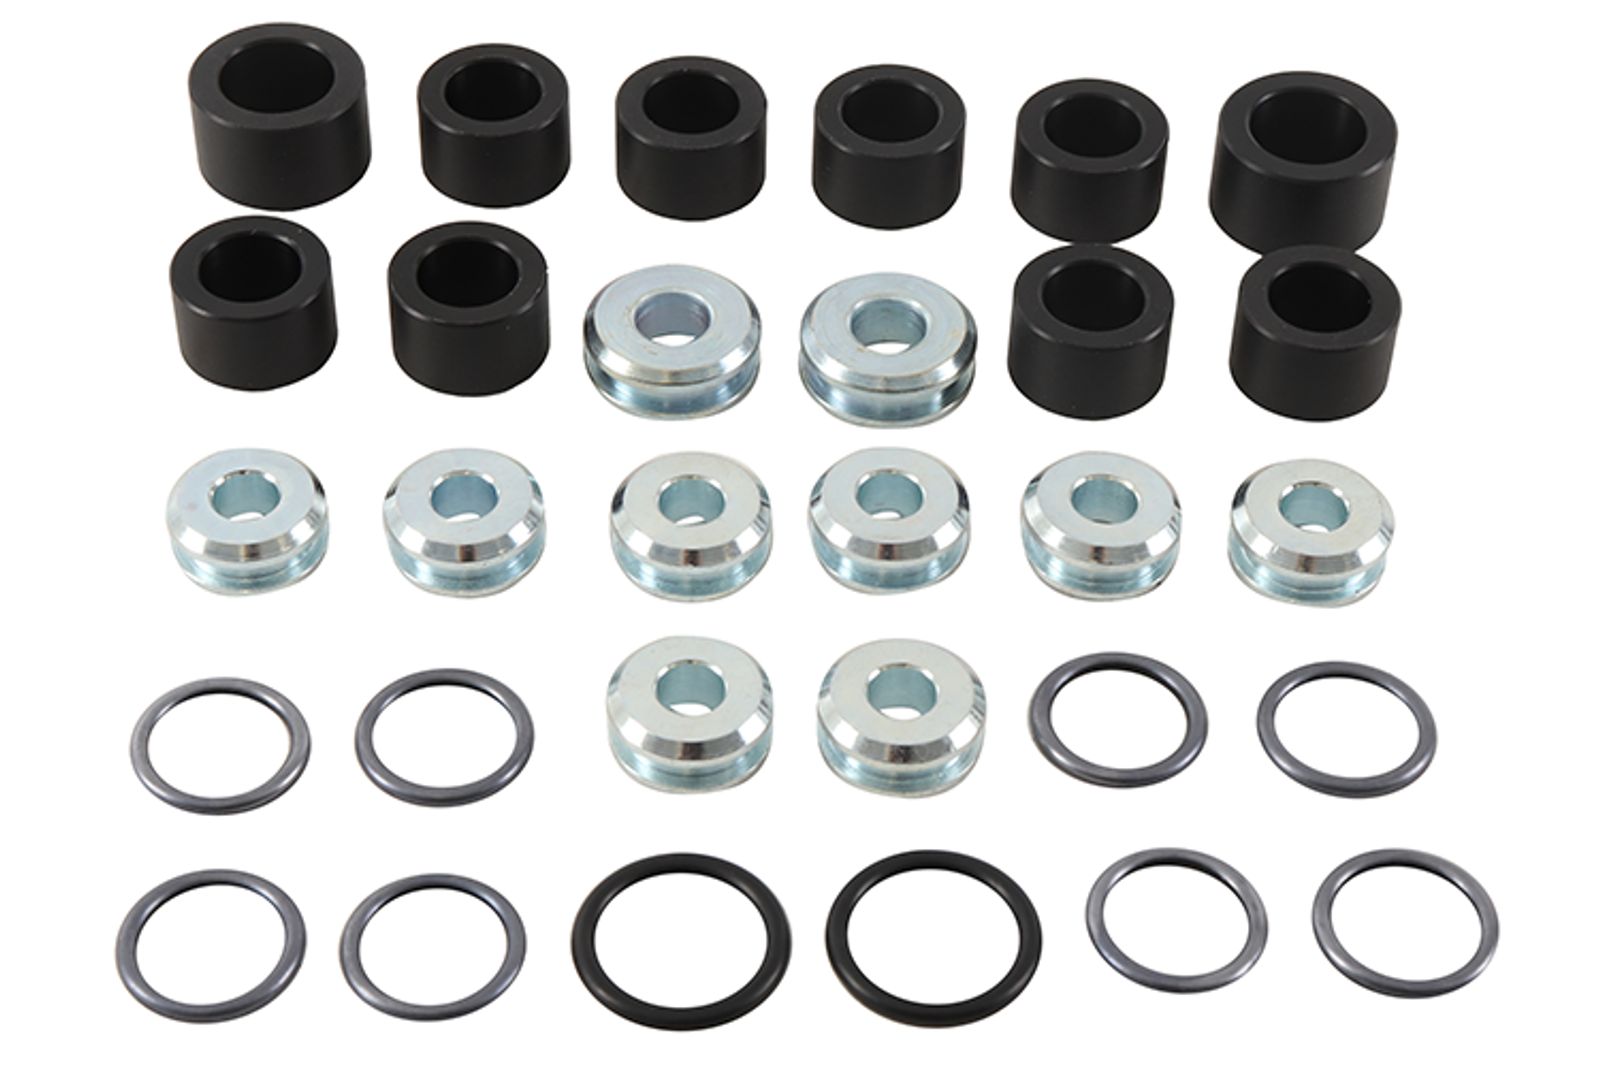 Wrp Rear Ind. Suspension Kits - WRP501201 image